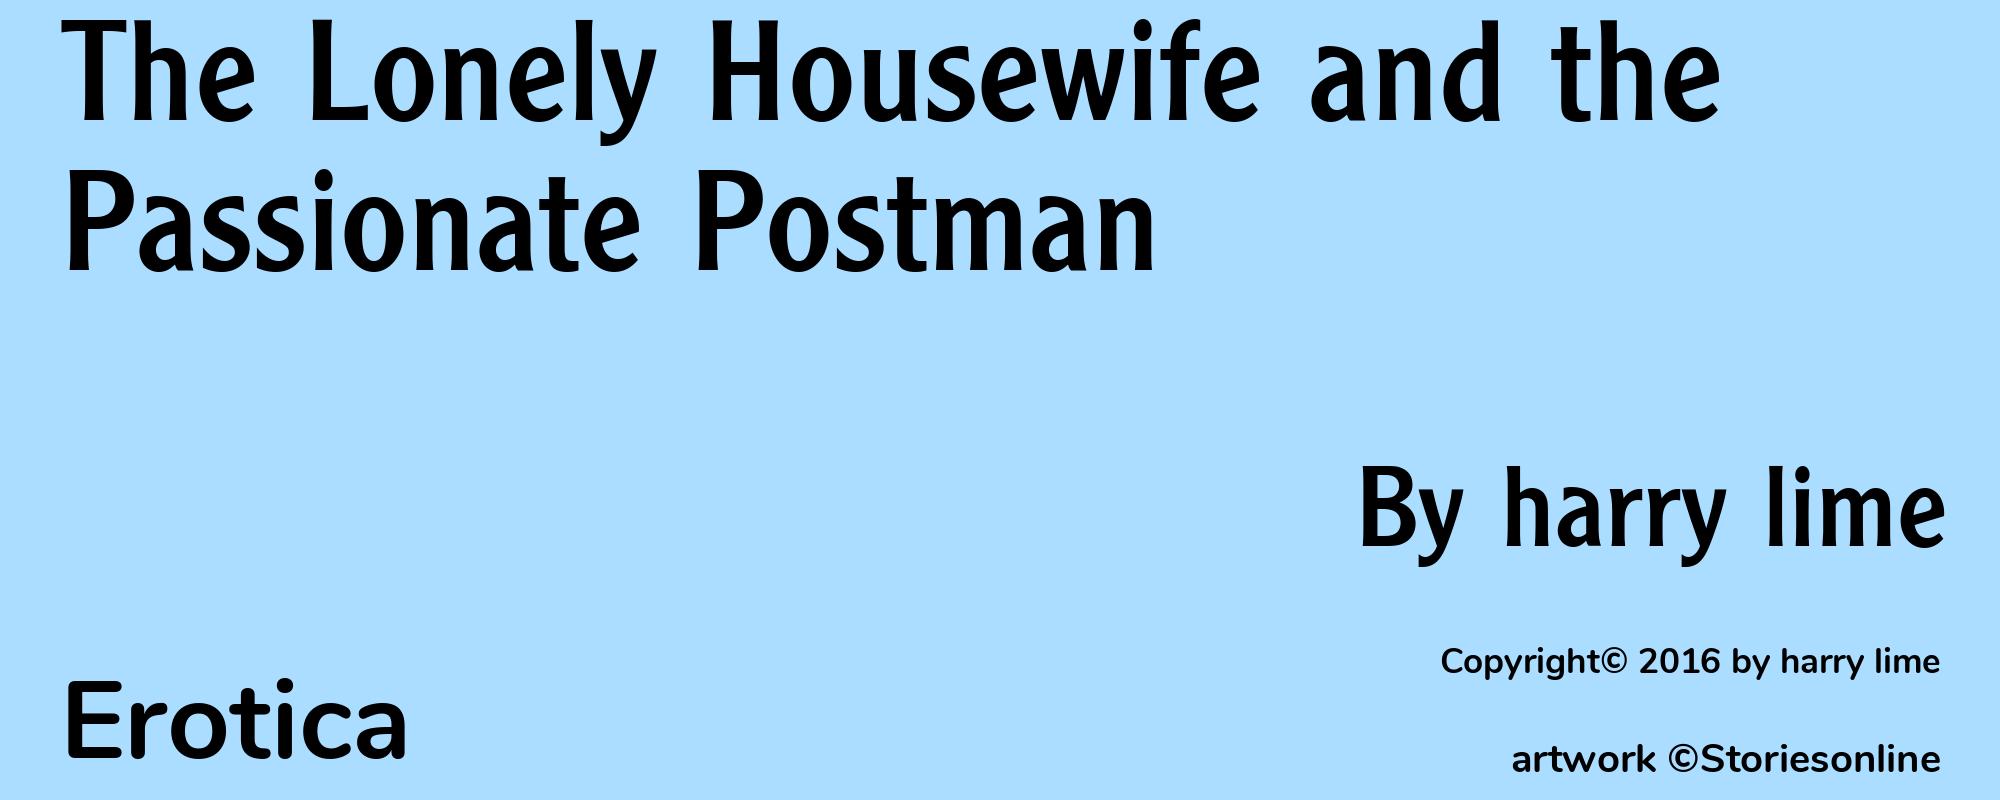 The Lonely Housewife and the Passionate Postman - Cover